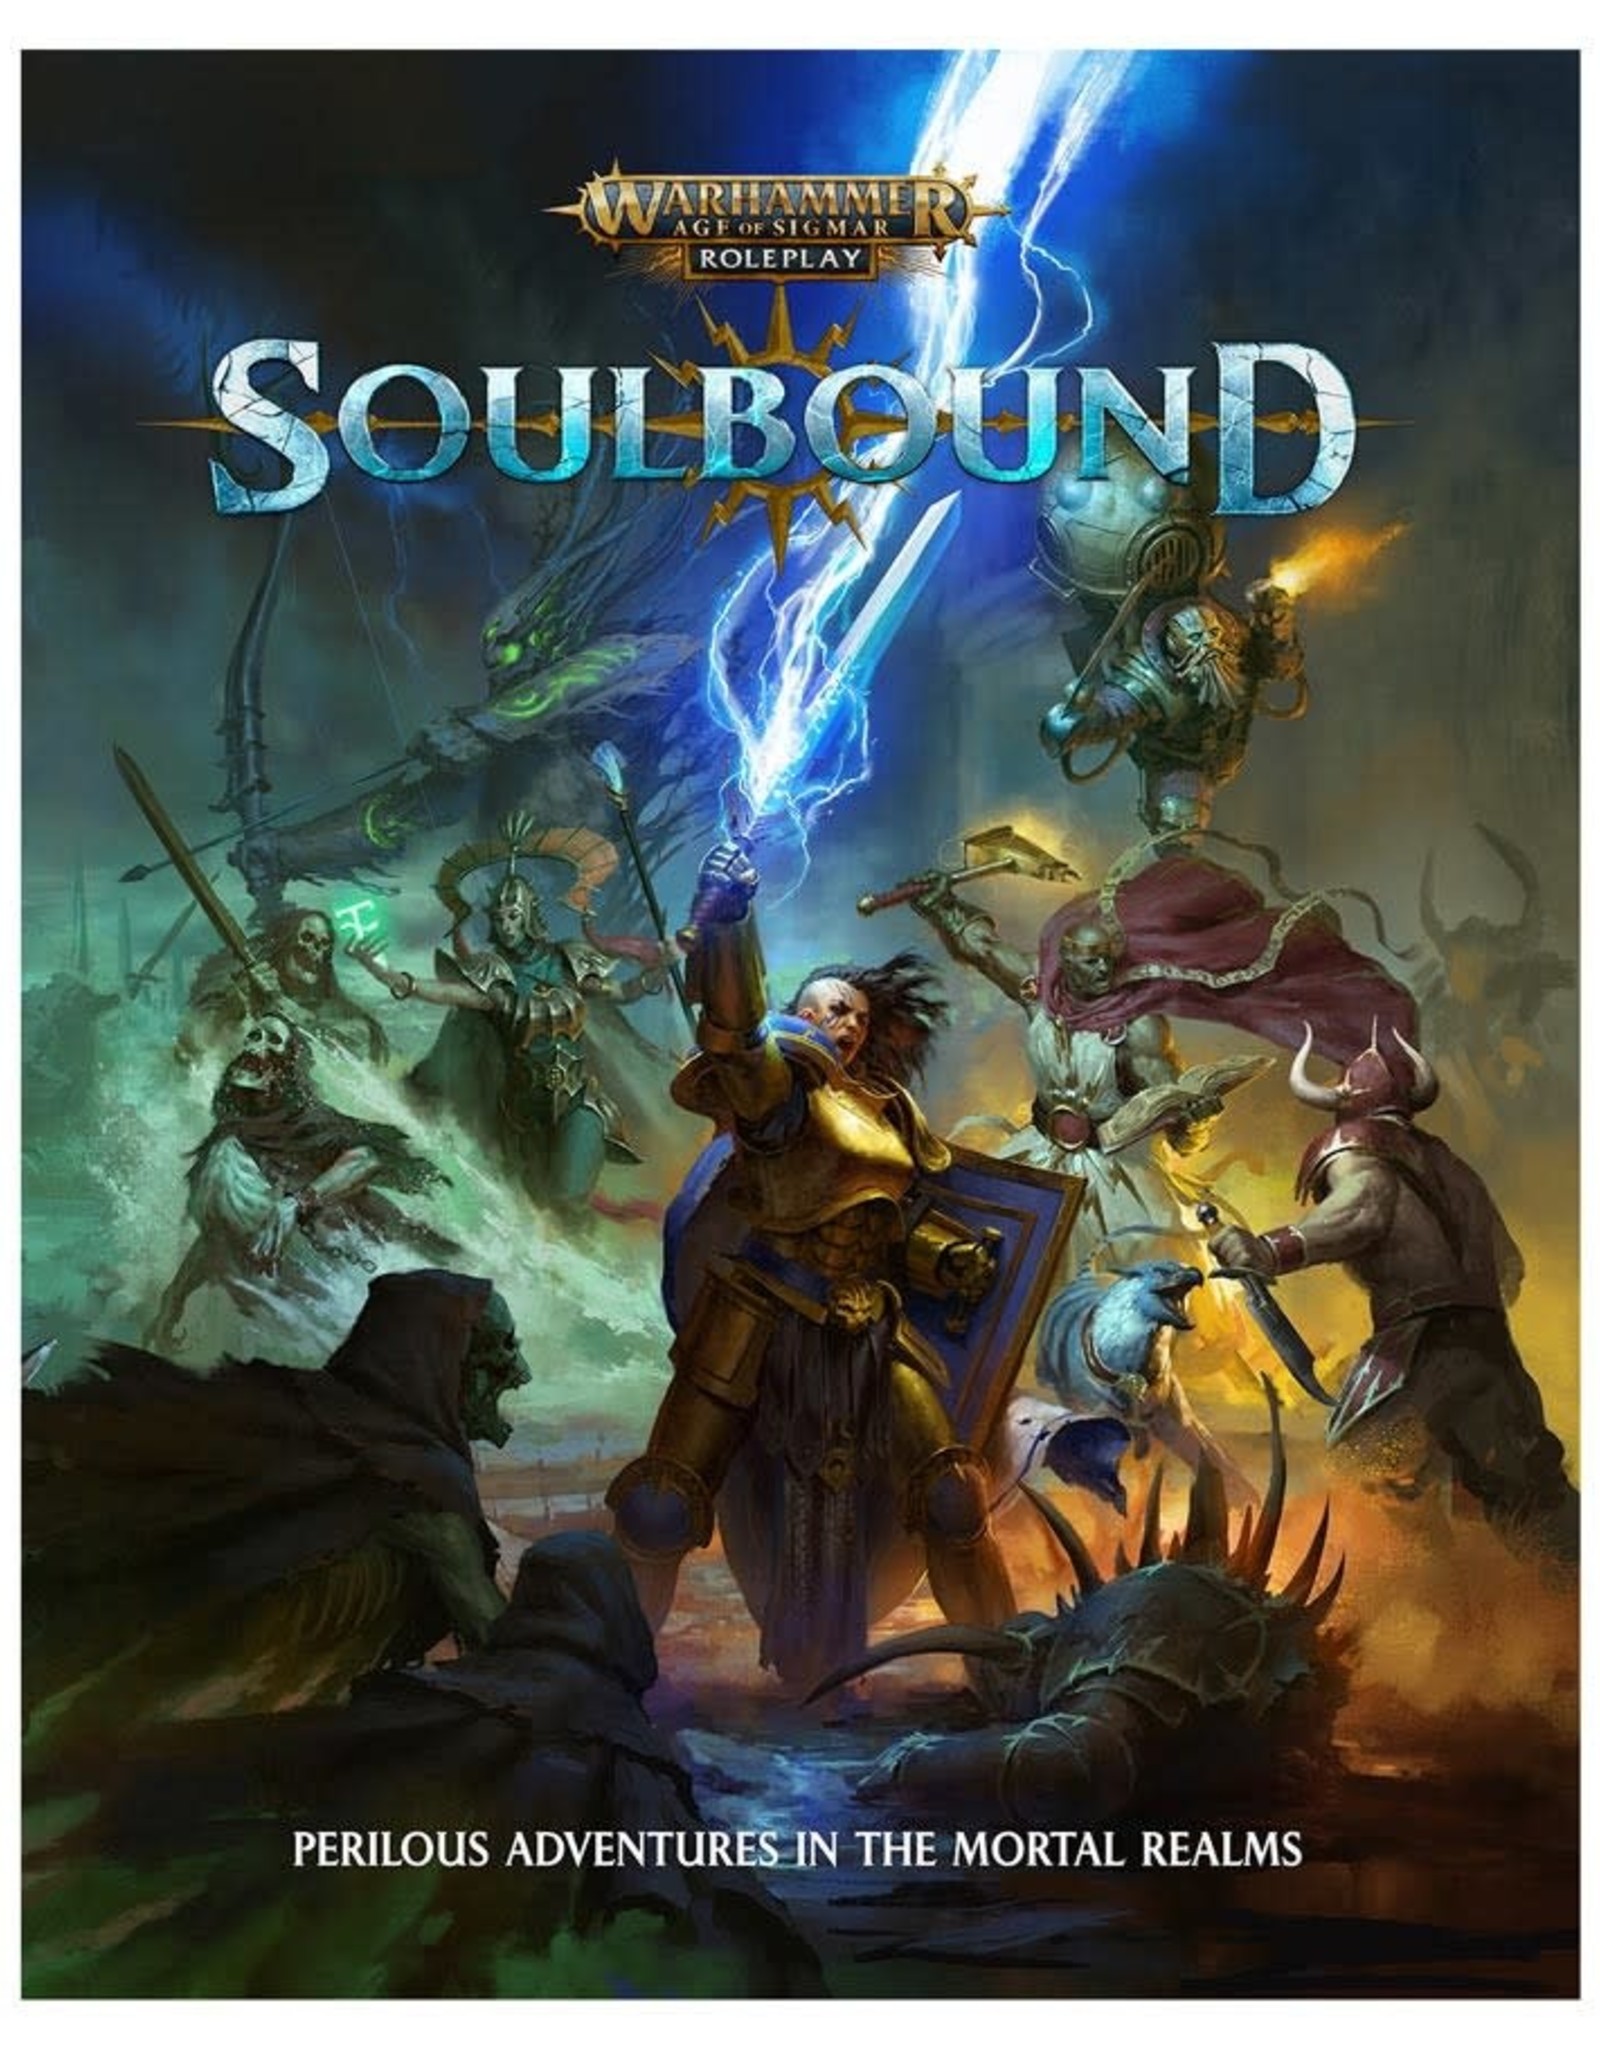 Cubicle 7 Entertainment Ltd Warhammer: Age of Sigmar - Soulbound RPG Core Book